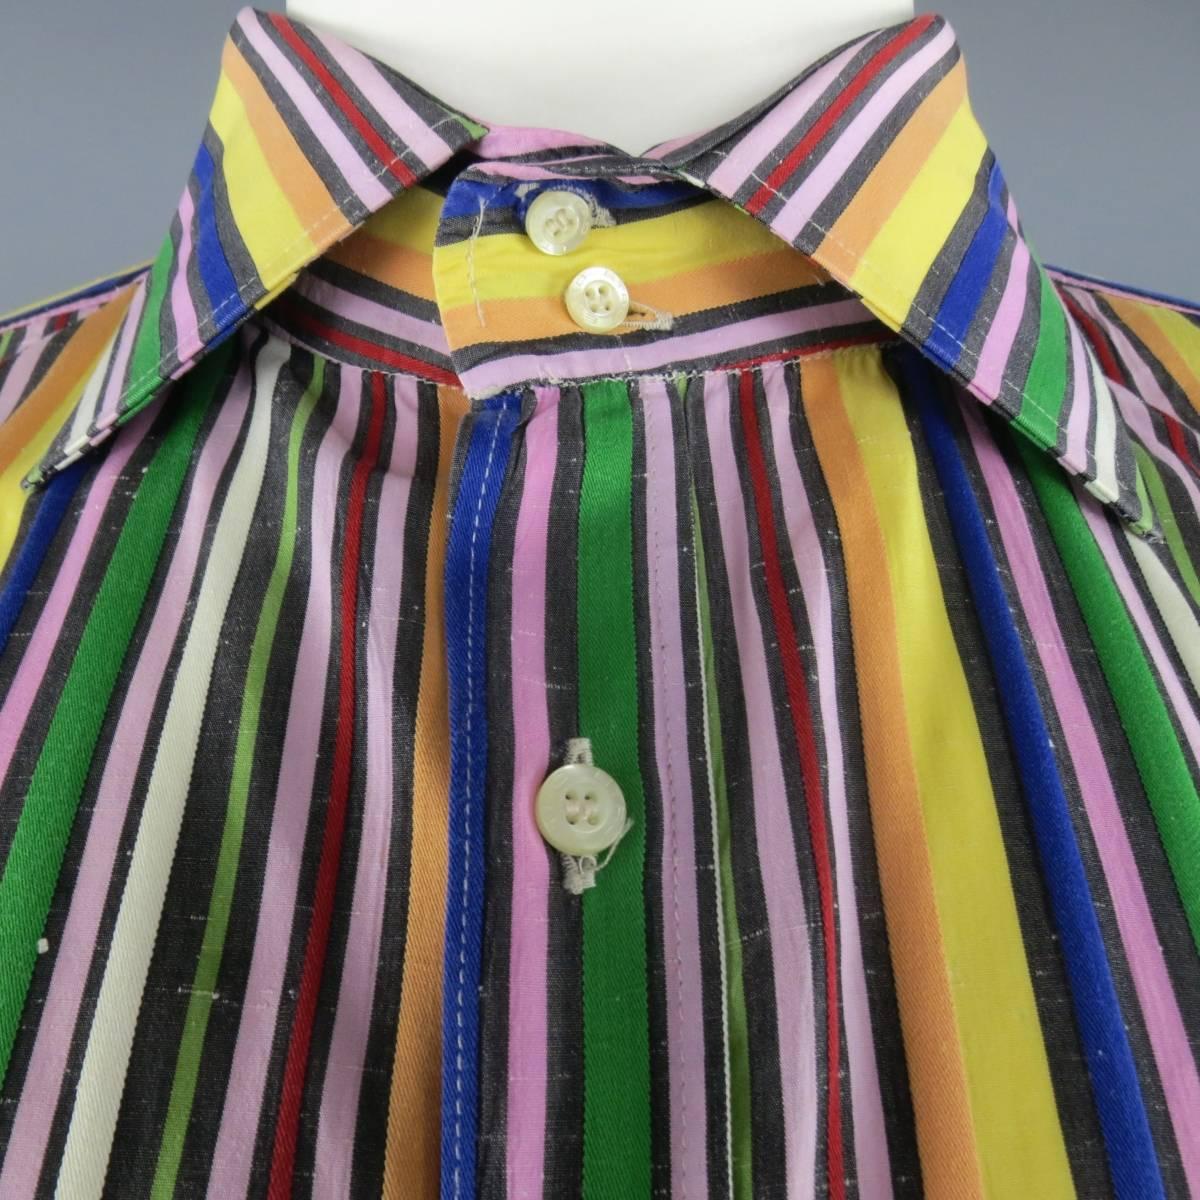 ETRO dress shirt in a multi color rainbow striped cotton with a pointed spread collar. Made in Italy.
 
Good Pre-Owned Condition.
Marked: 46
 
Measurements:
 
Shoulder: 20 in.
Chest: 56 in.
Sleeve: 25.5 in.
Length: 35 in.


Web ID: 82999 